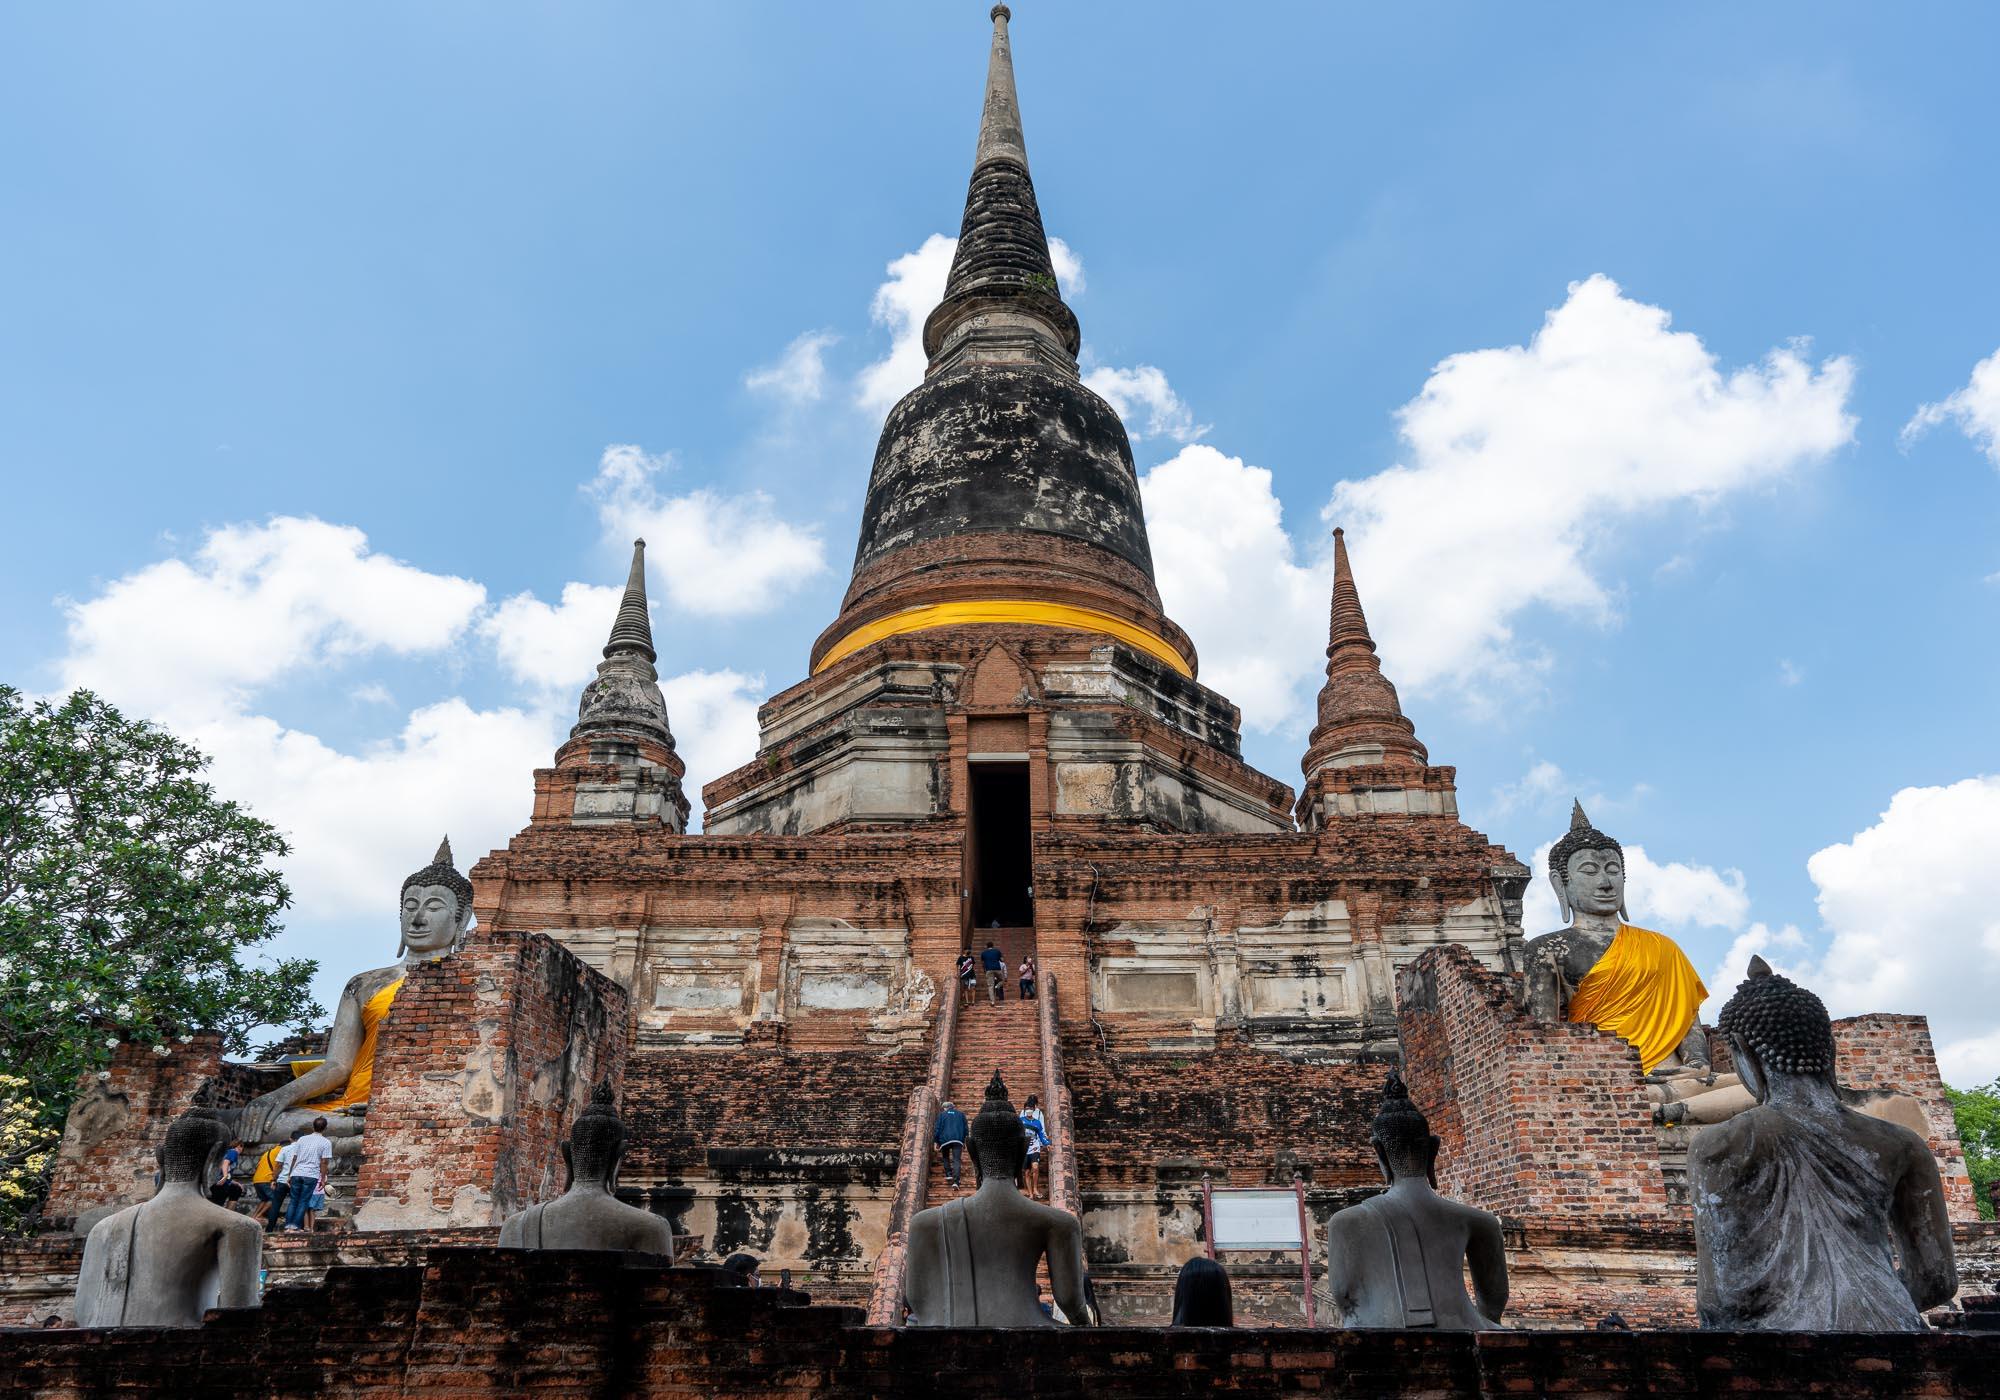 The restored temple of Wat Yai Chai Mongkhon has a soaring stupa surrounded by Buddha statues and is popular with worshippers. – © Michael Turtle